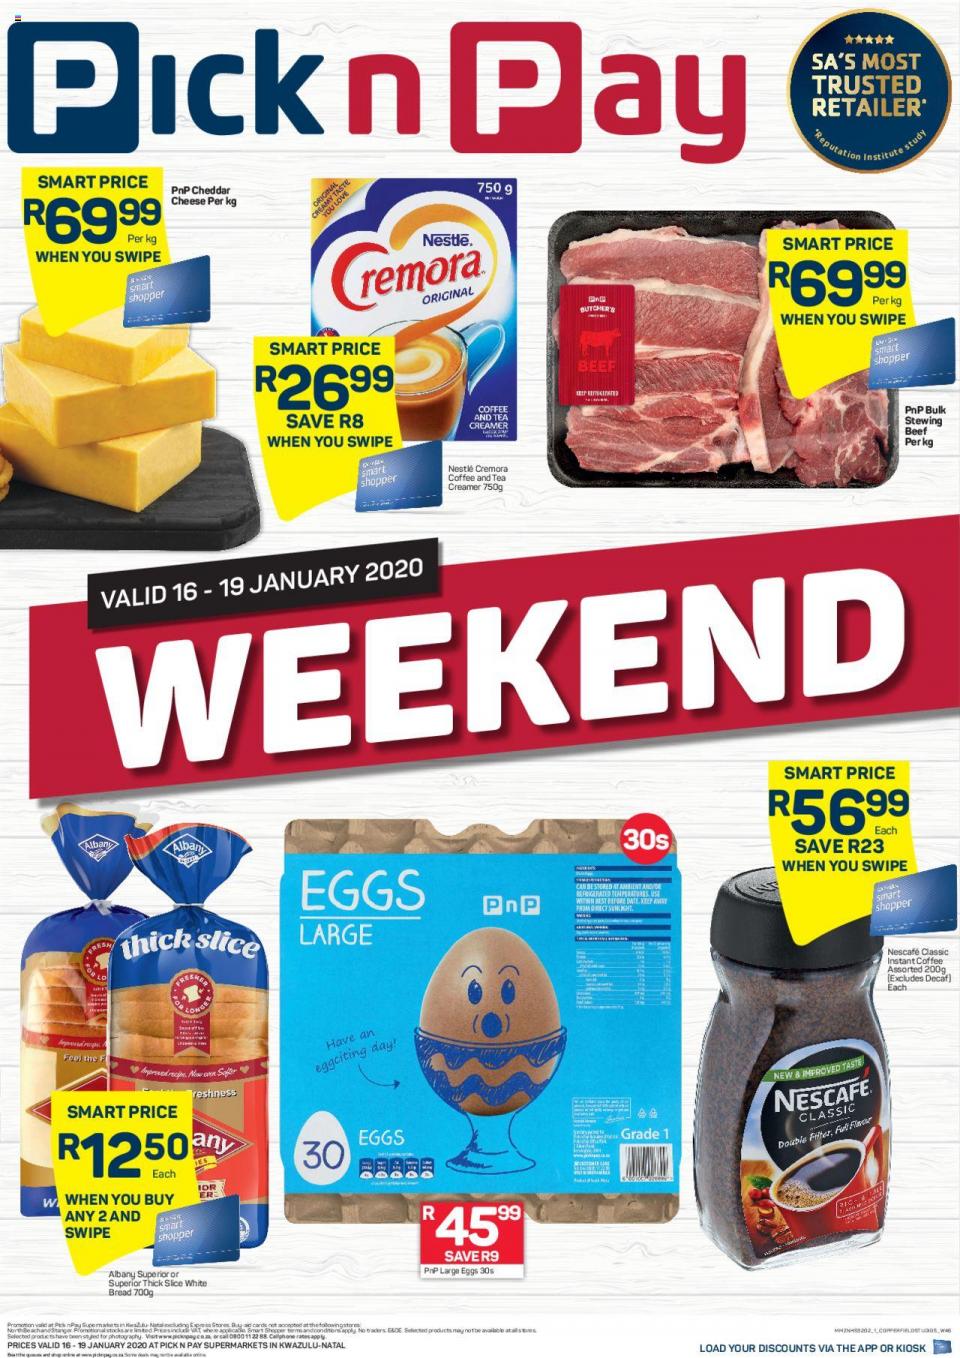 Pick n Pay Specials This Weekend 17 January 2020